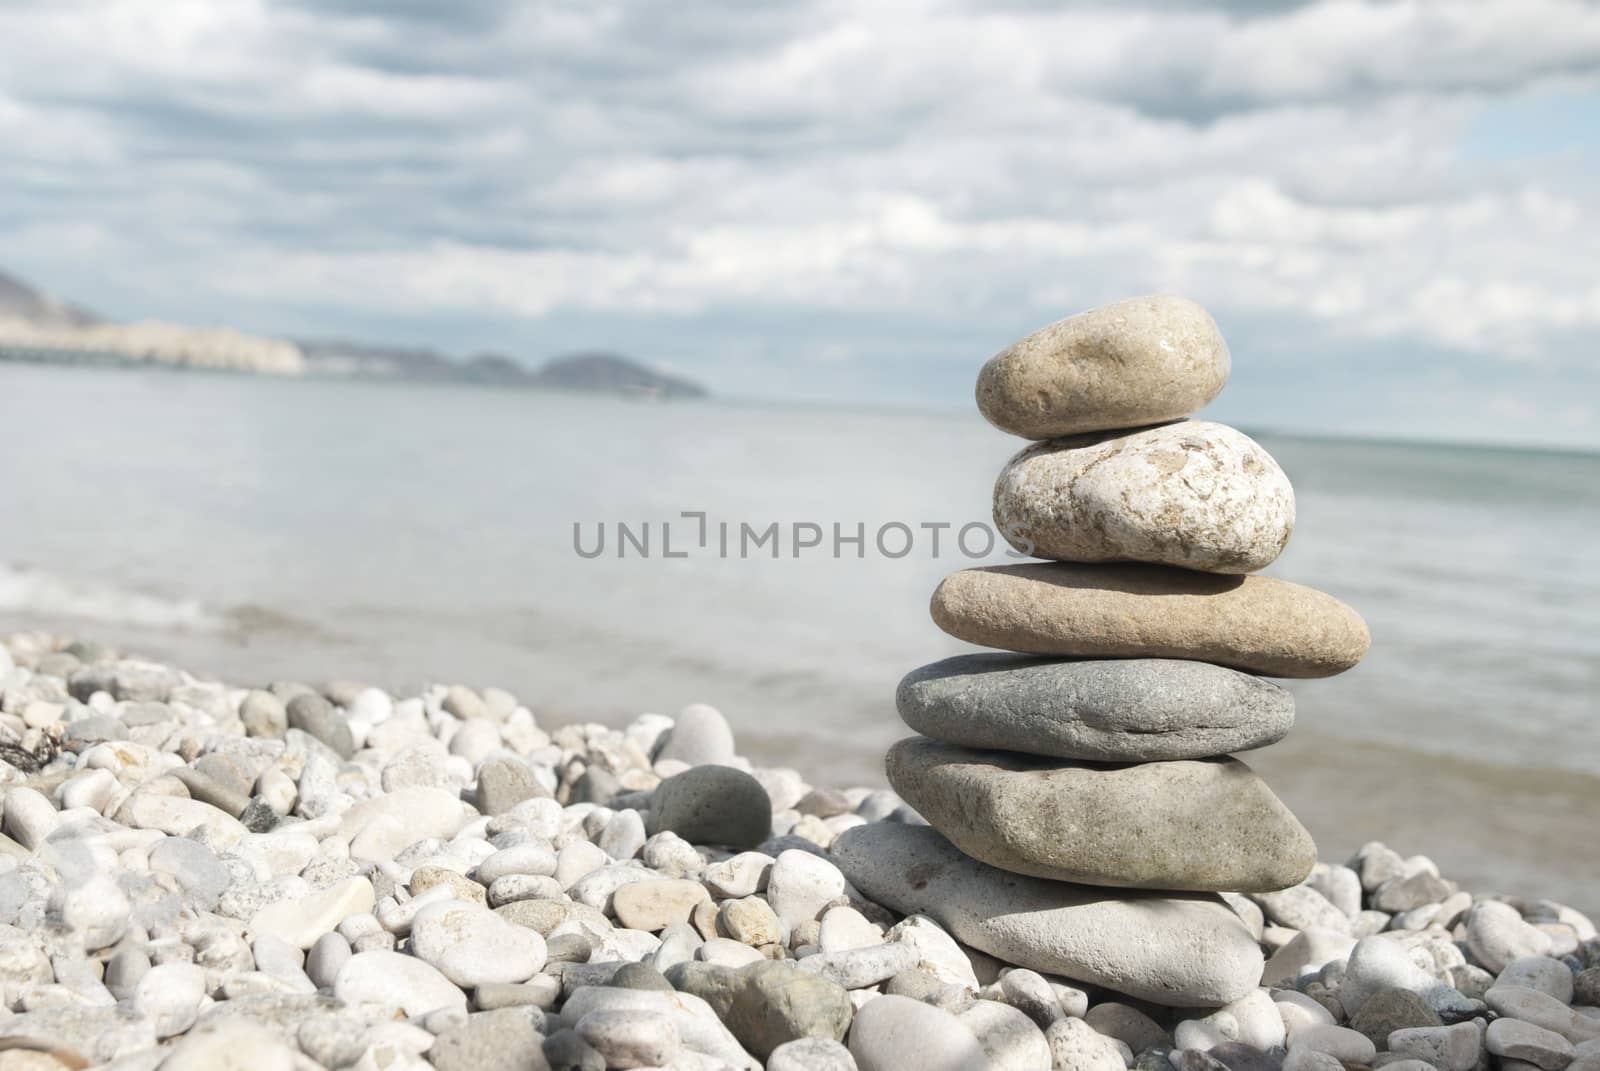 A tall pile of rocks stacked on the beach